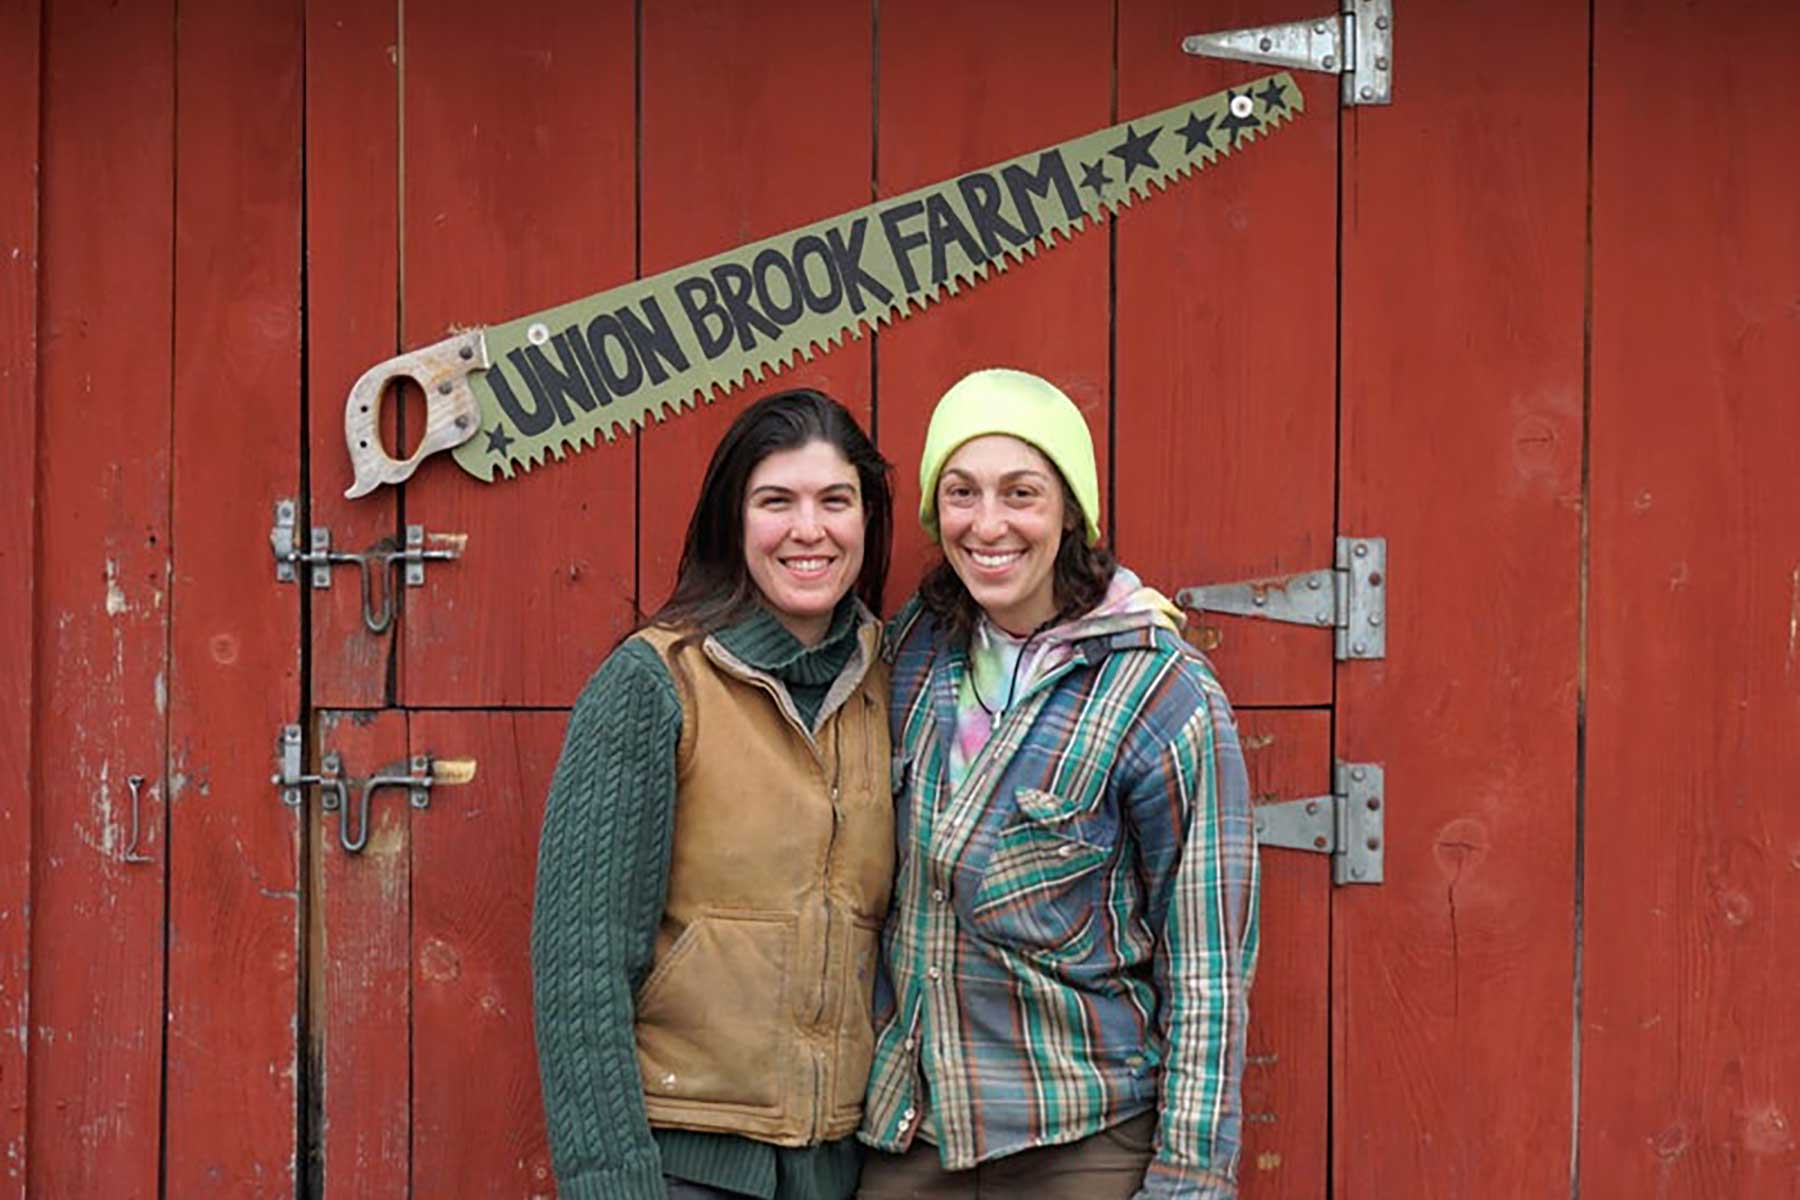 Union Brook Farmers in front of their red barn